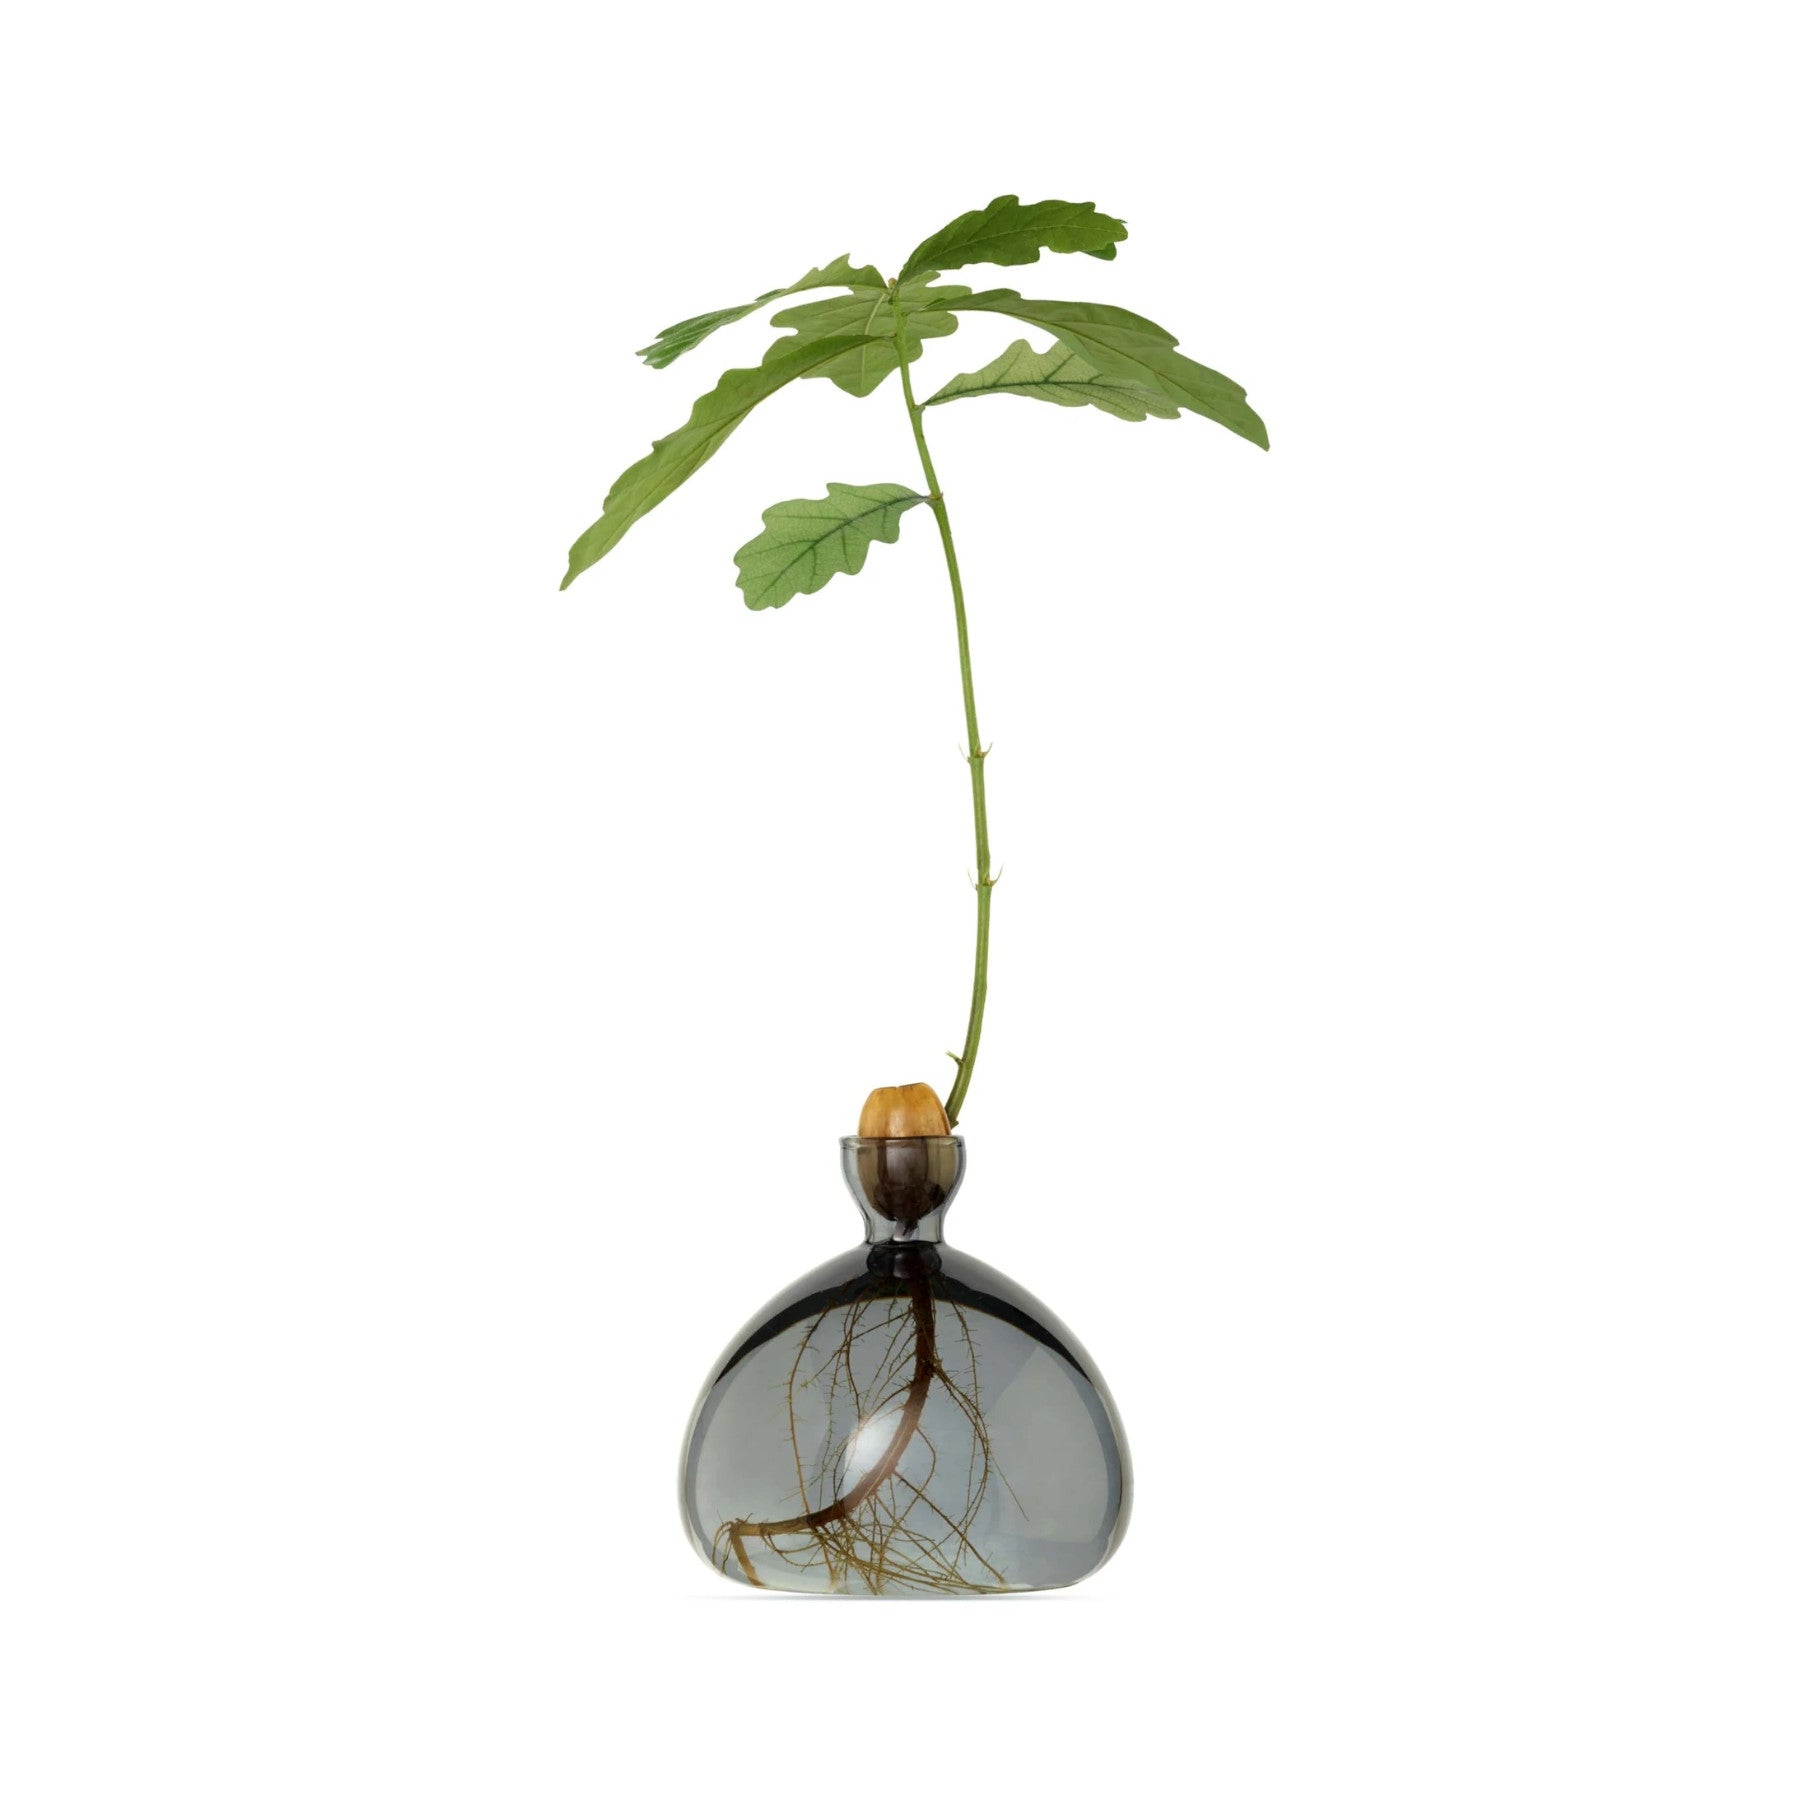 Young oak sapling growing in a glass bottle with water, visible root system, isolated on white background.